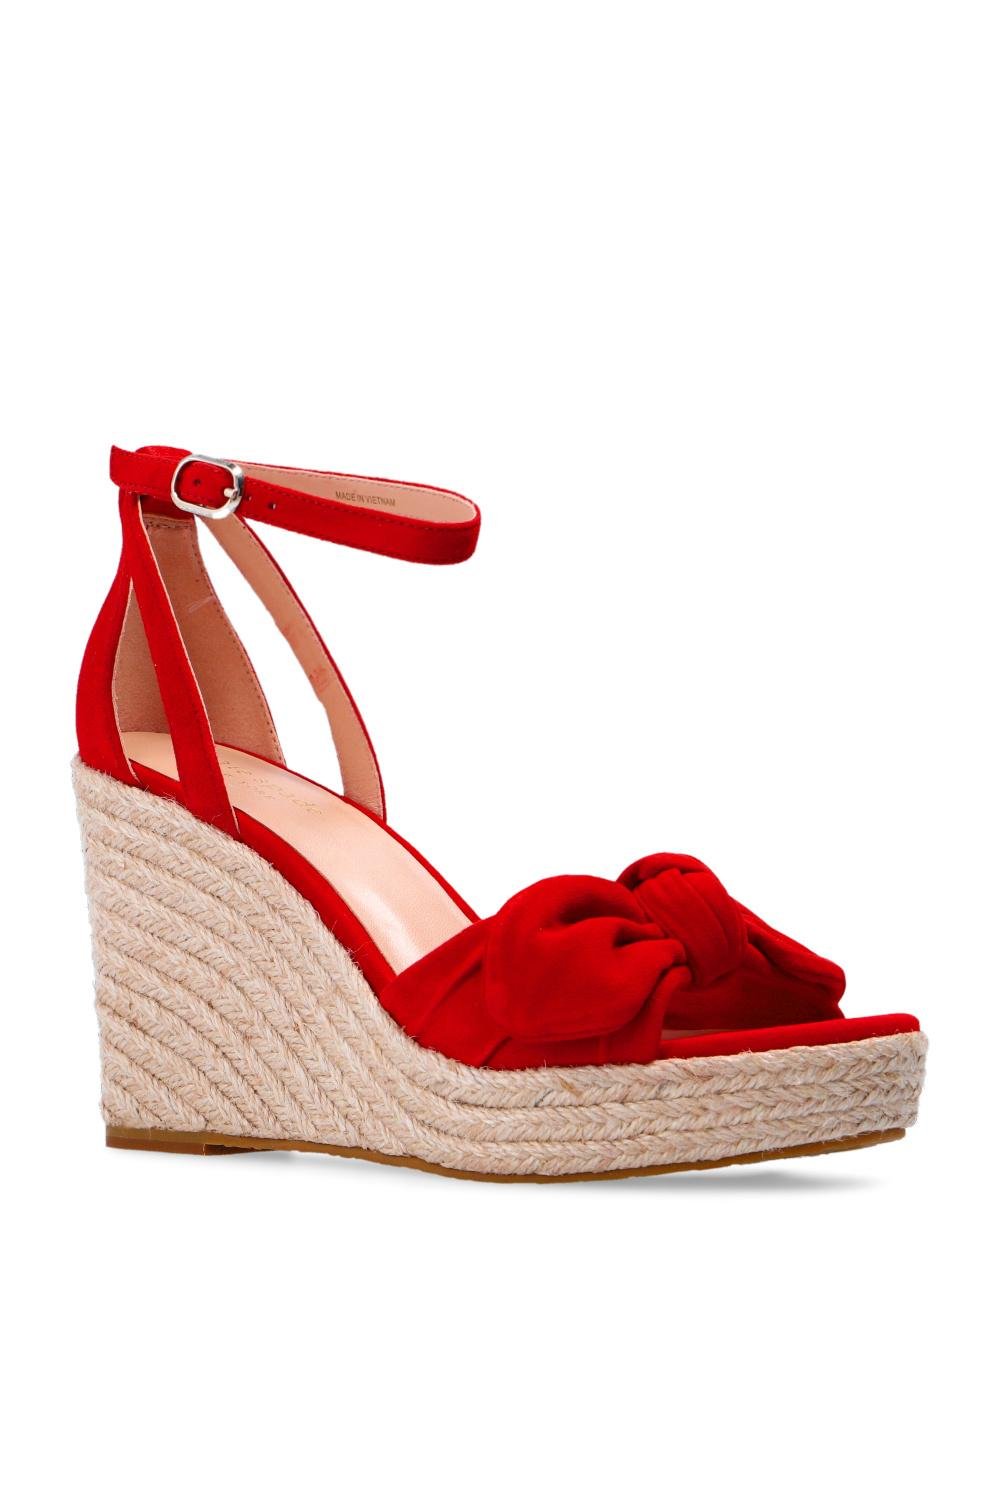 Kate Spade 'tianna' Wedge Sandals in Red | Lyst Canada